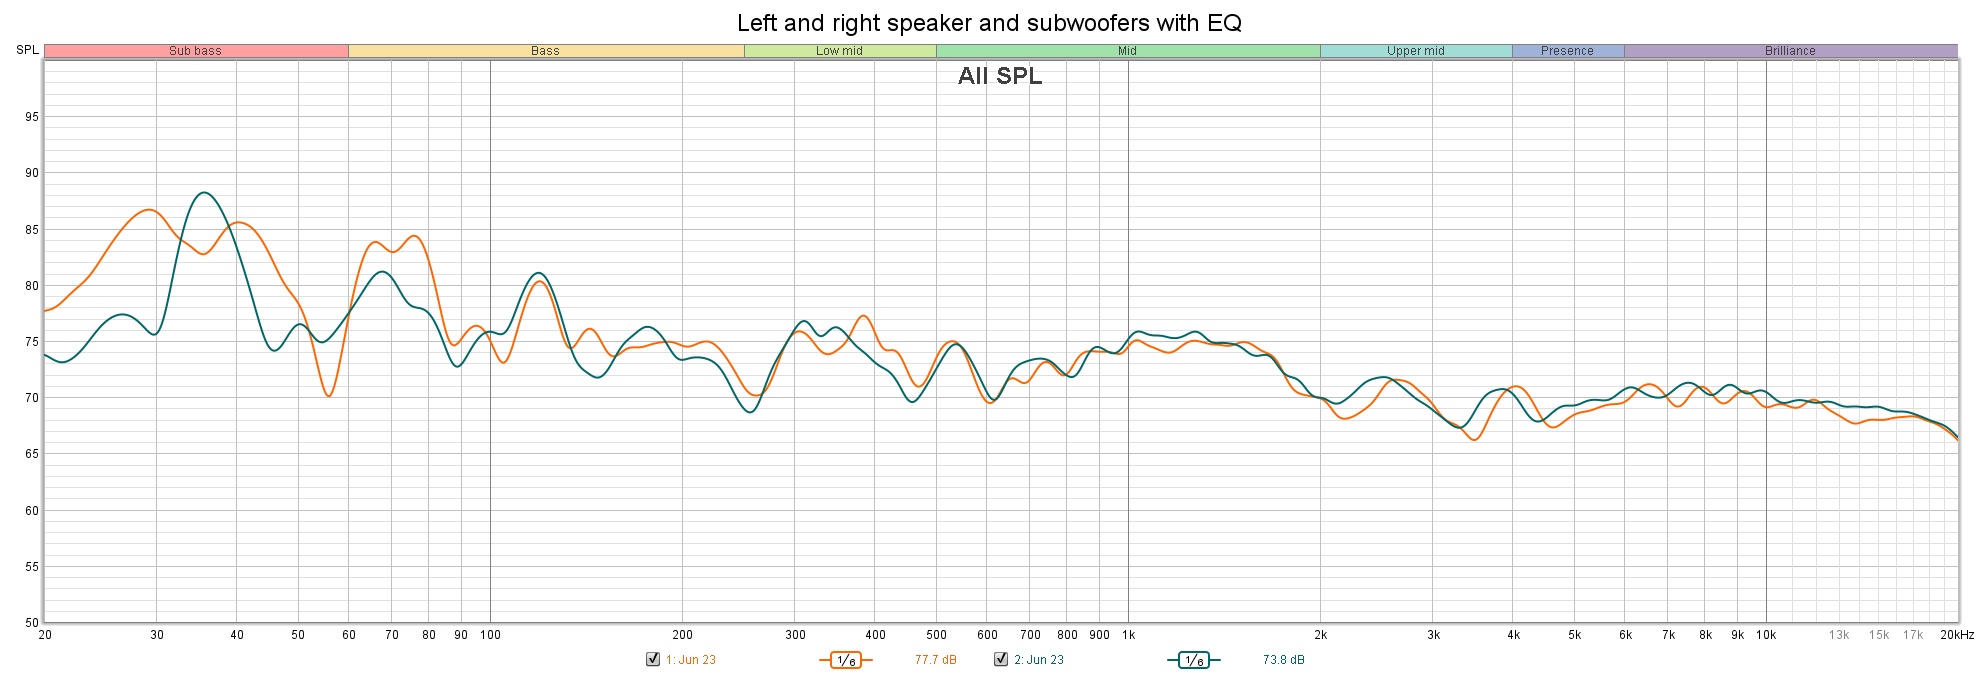 Left and right speaker and subwoofers with EQ.jpg